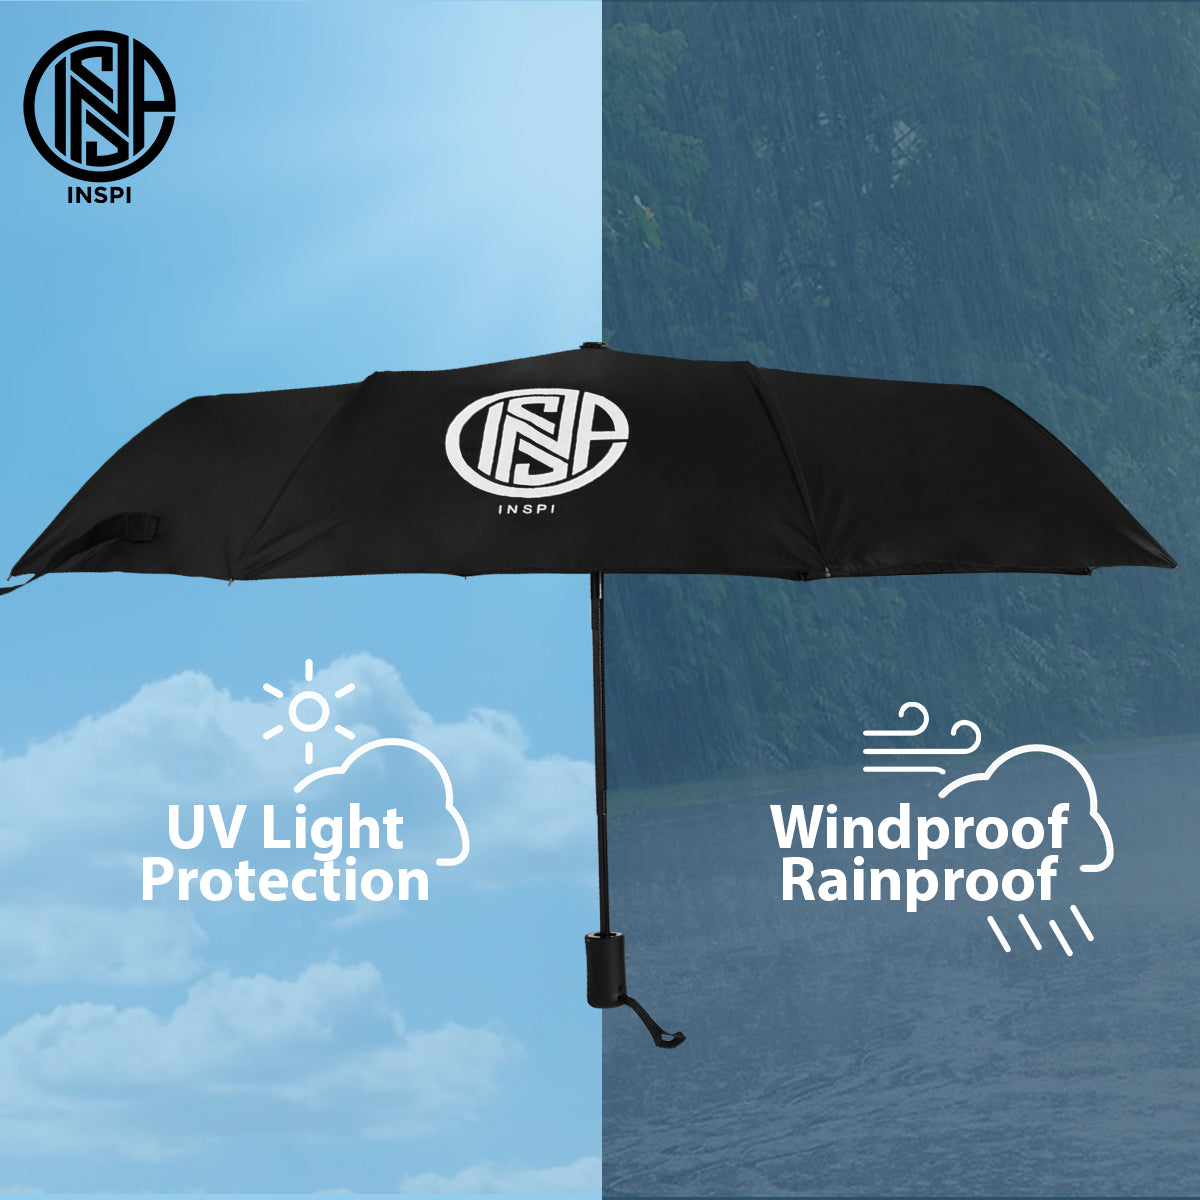 INSPI Umbrella Folding Automatic w/ Sun Protection Waterproof Wind Resistant Premium Quality Payong